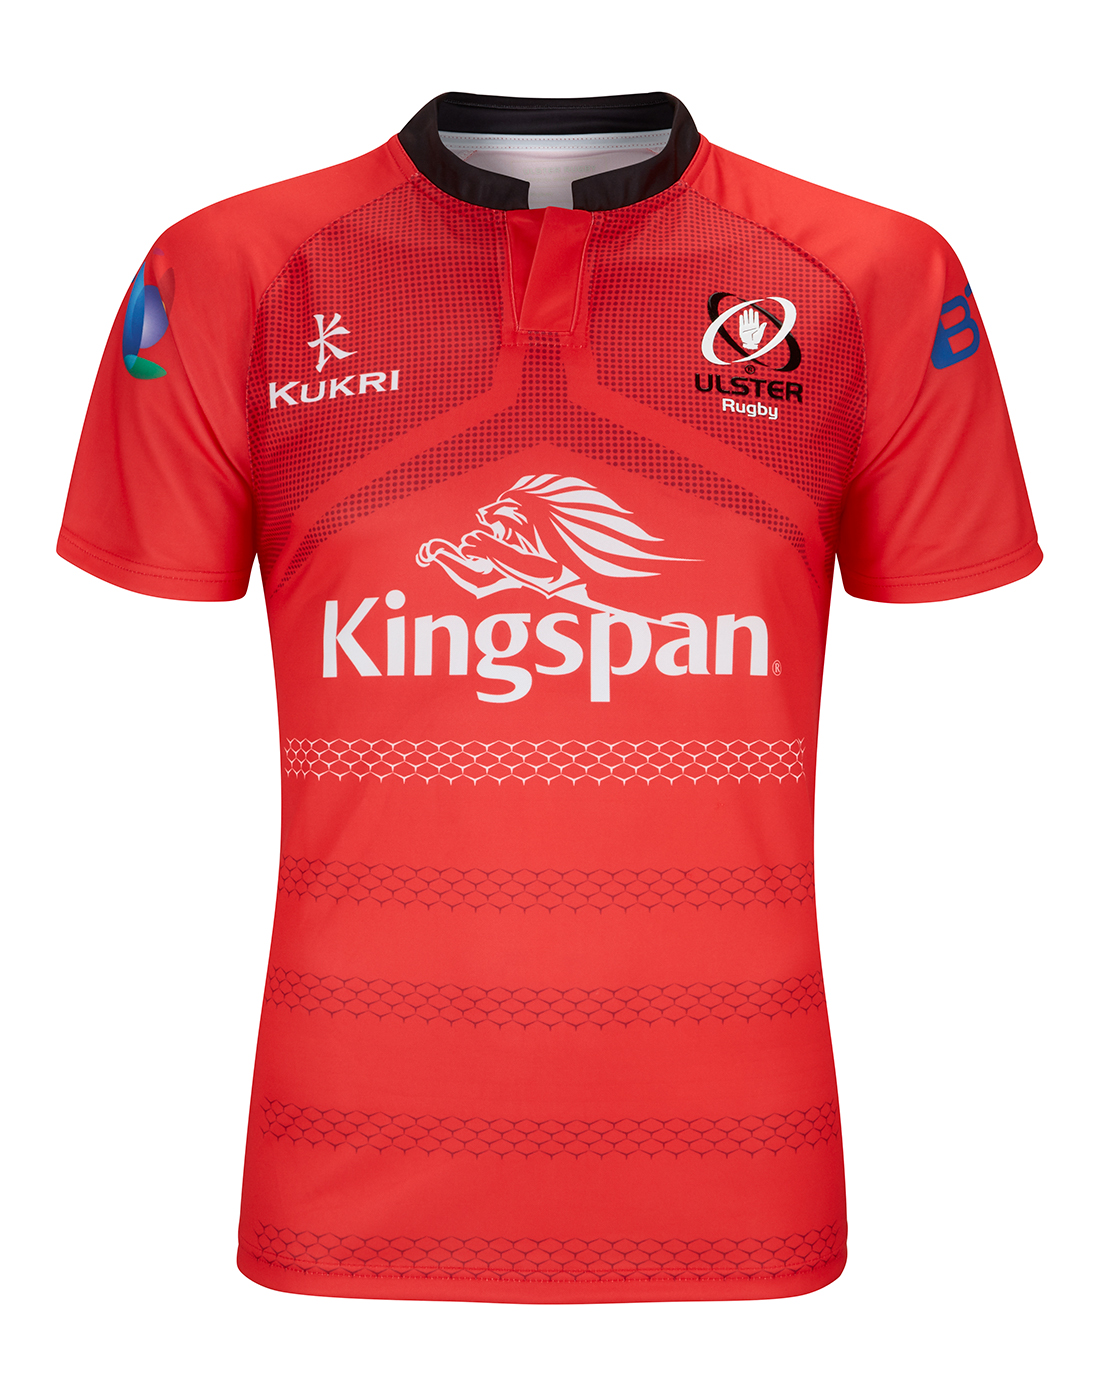 ulster rugby jersey